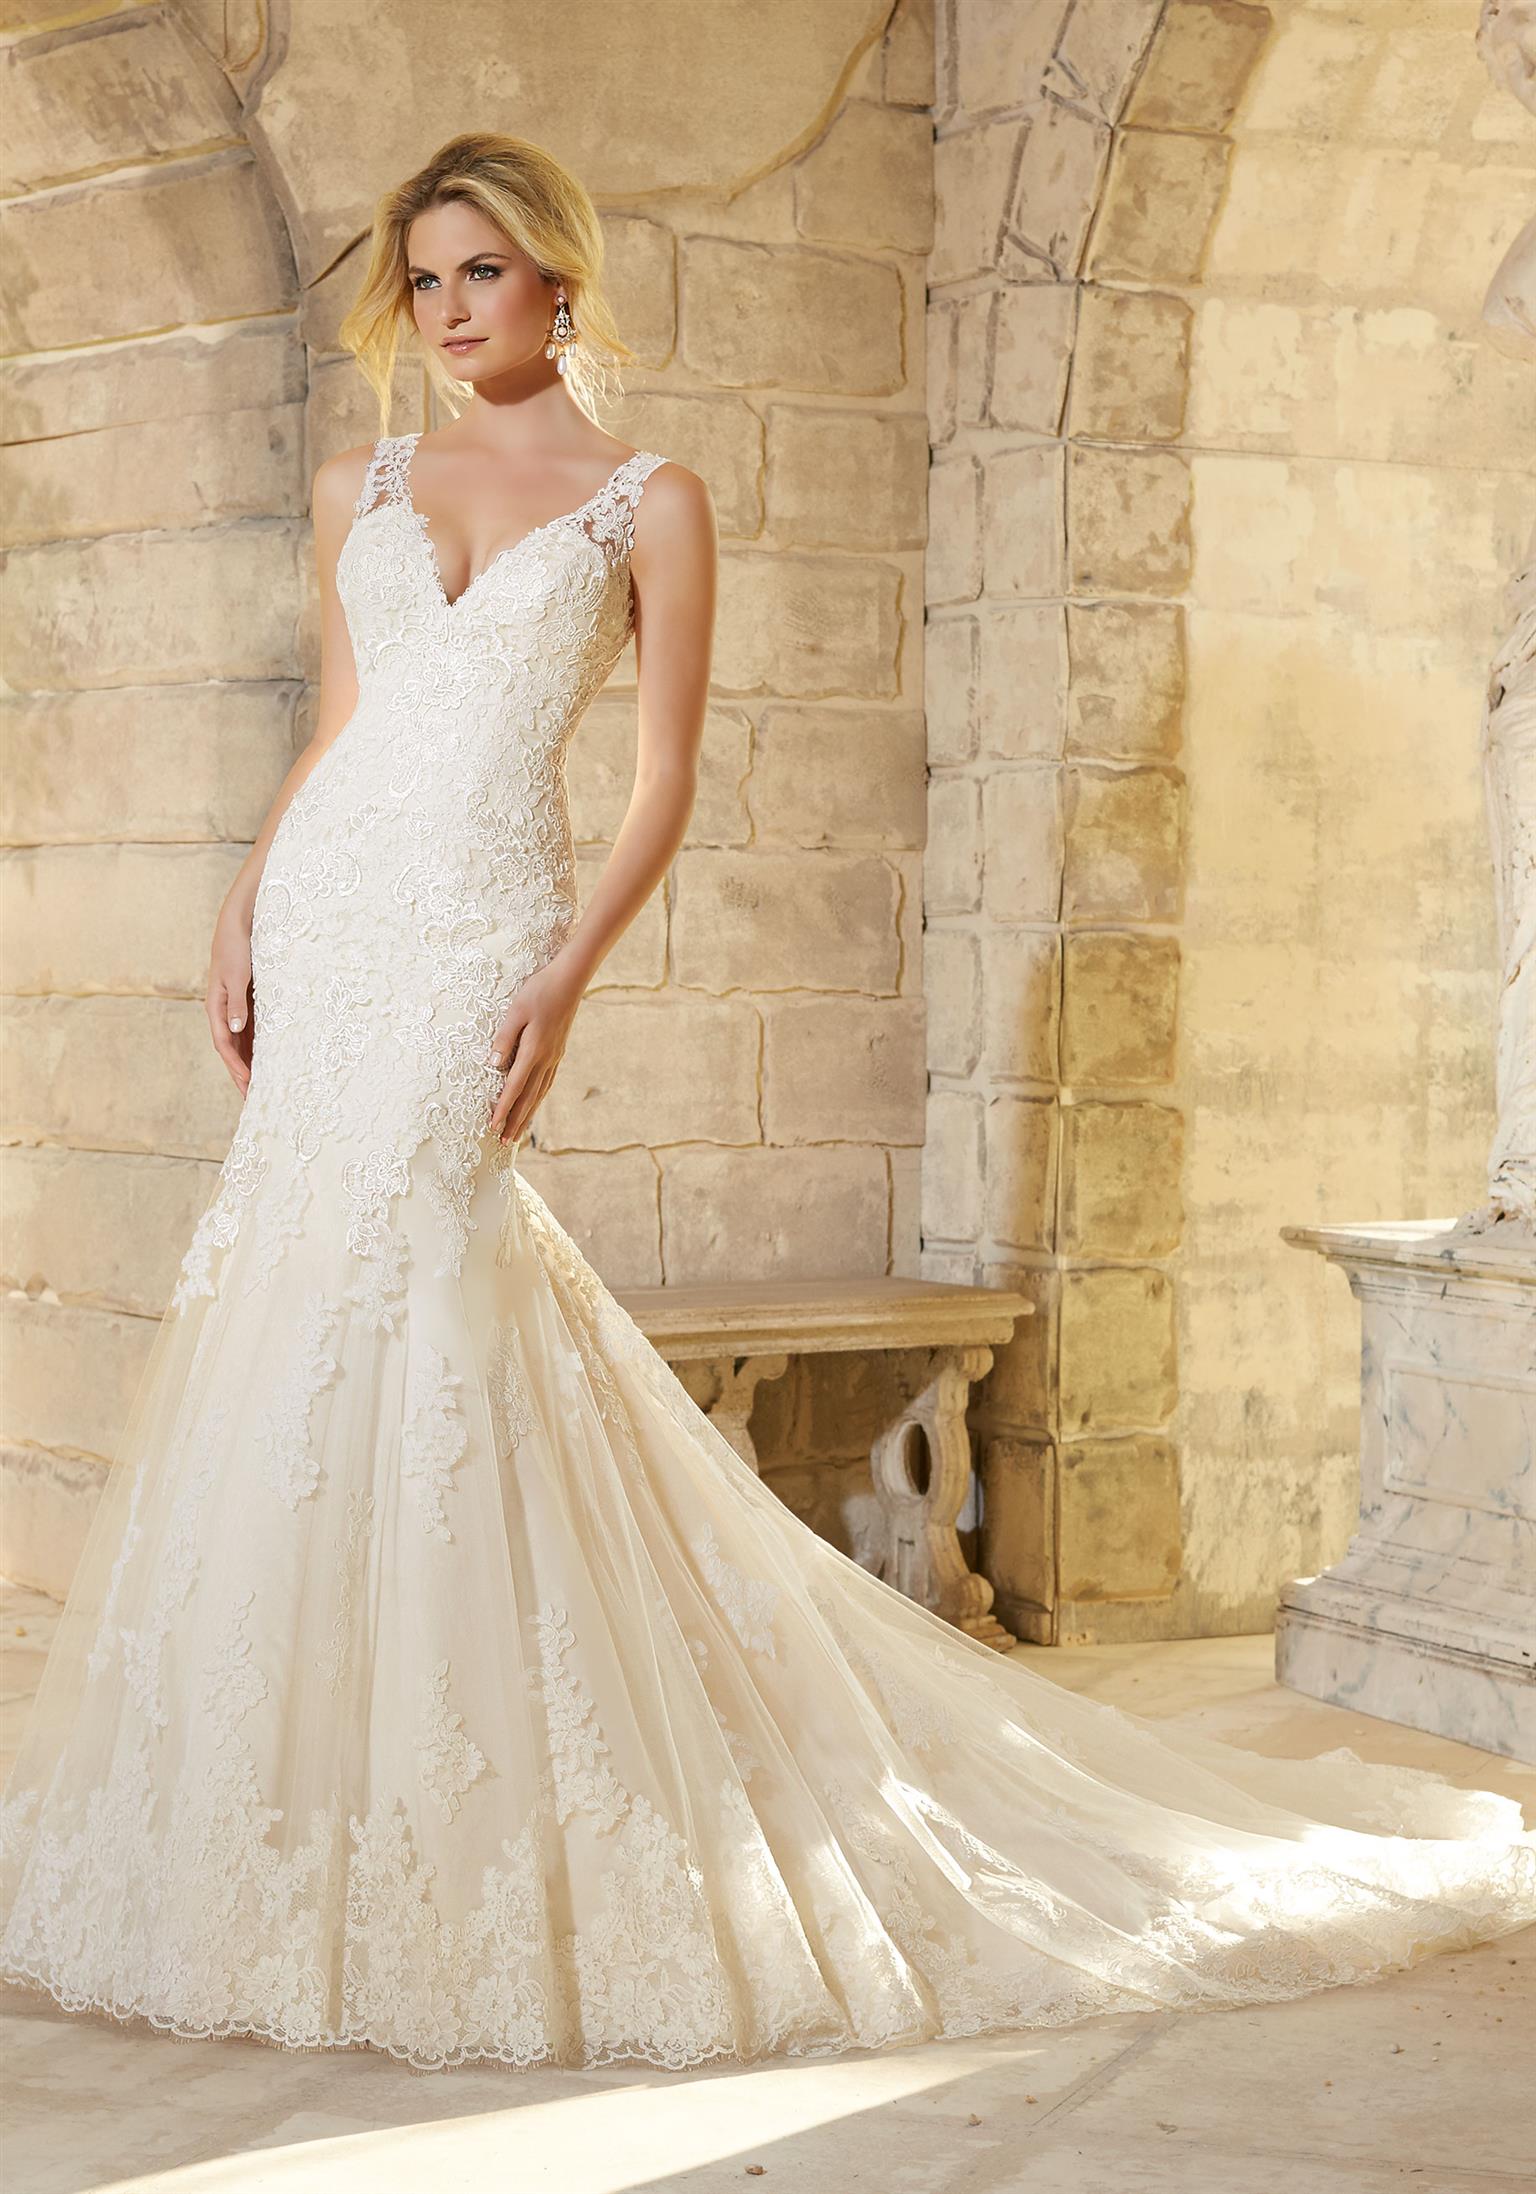 Wholesalers and importers of international designer wedding gowns